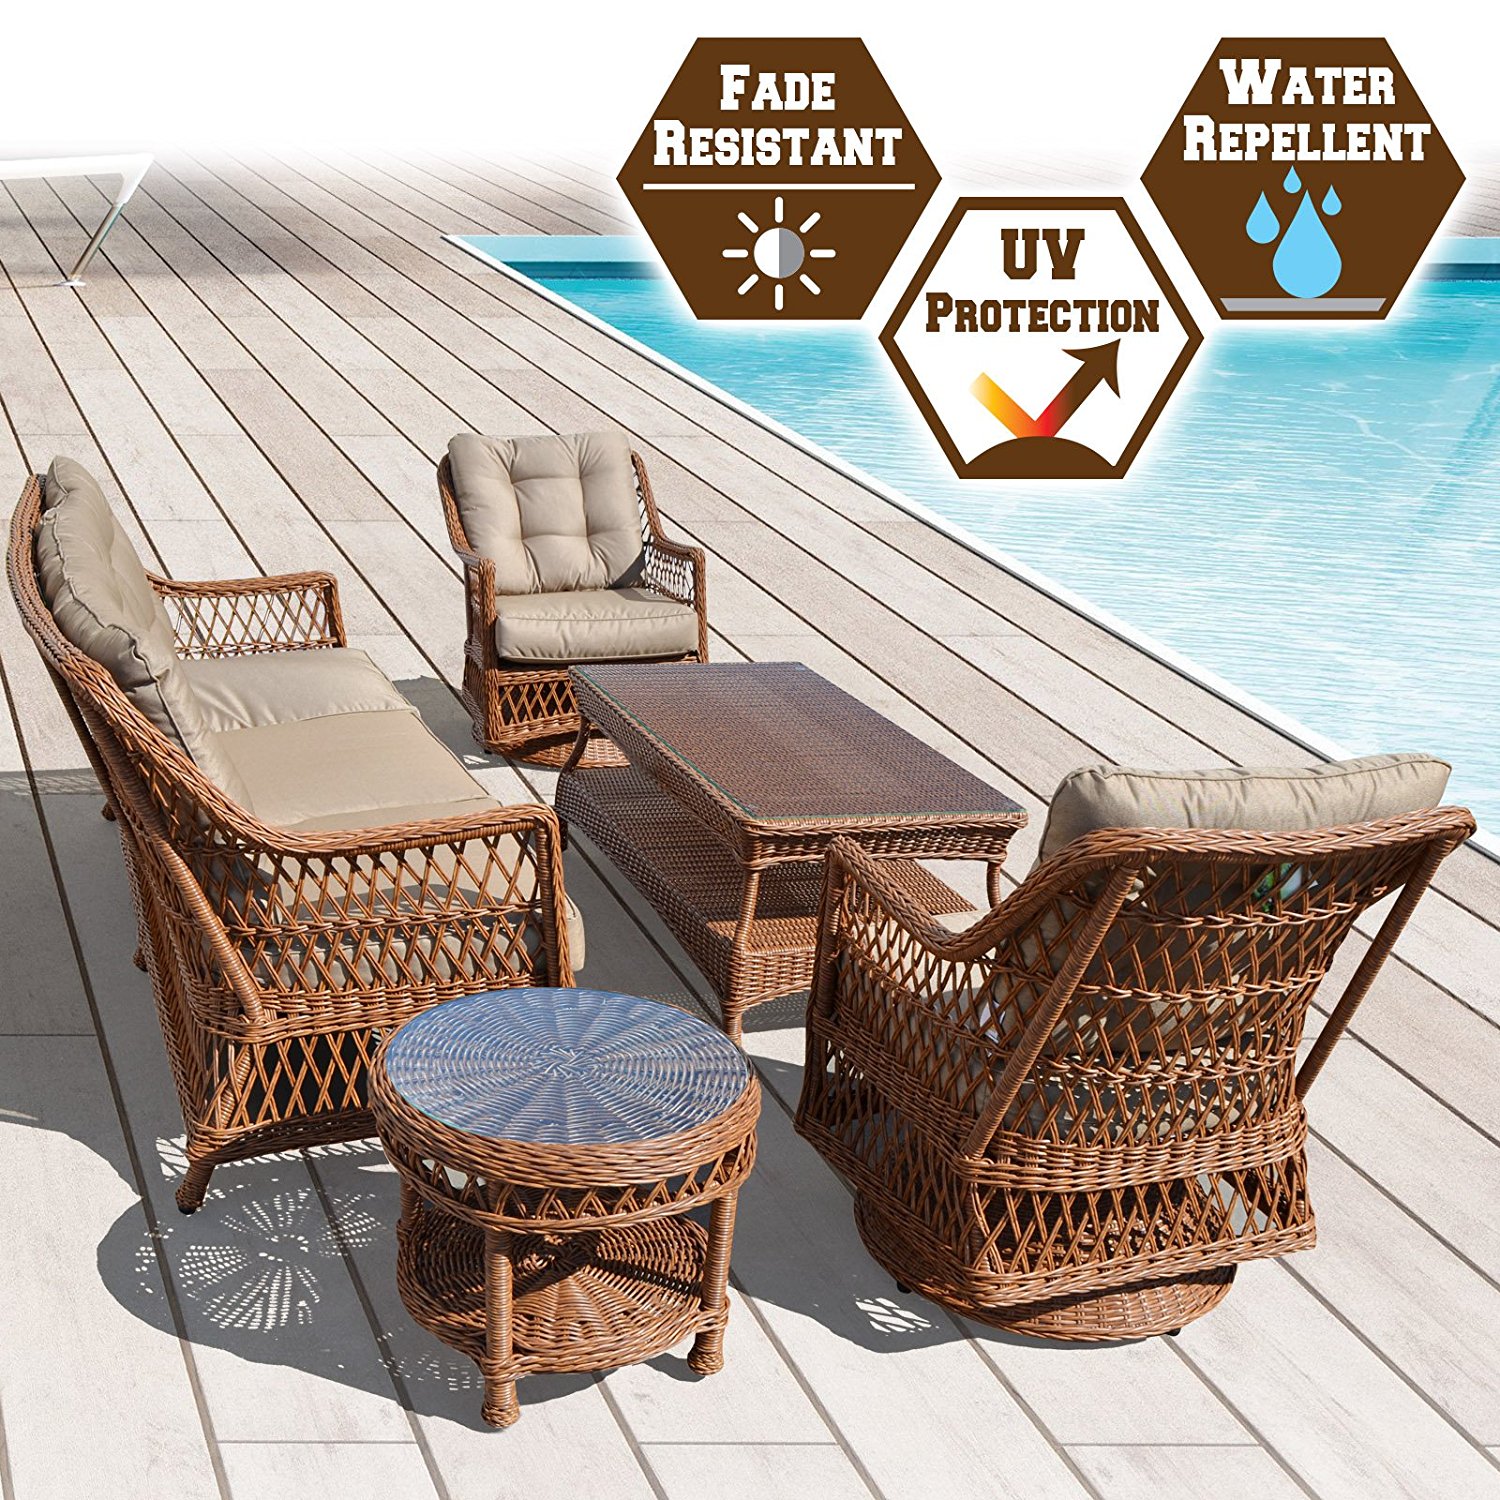 Sunny 5pc Wicker Rattan Table Chair Patio Sofa Furniture Set with Cushions Outdoor Garden W/ 3 Swivel Revolving Chairs and 2 Tables - image 1 of 8